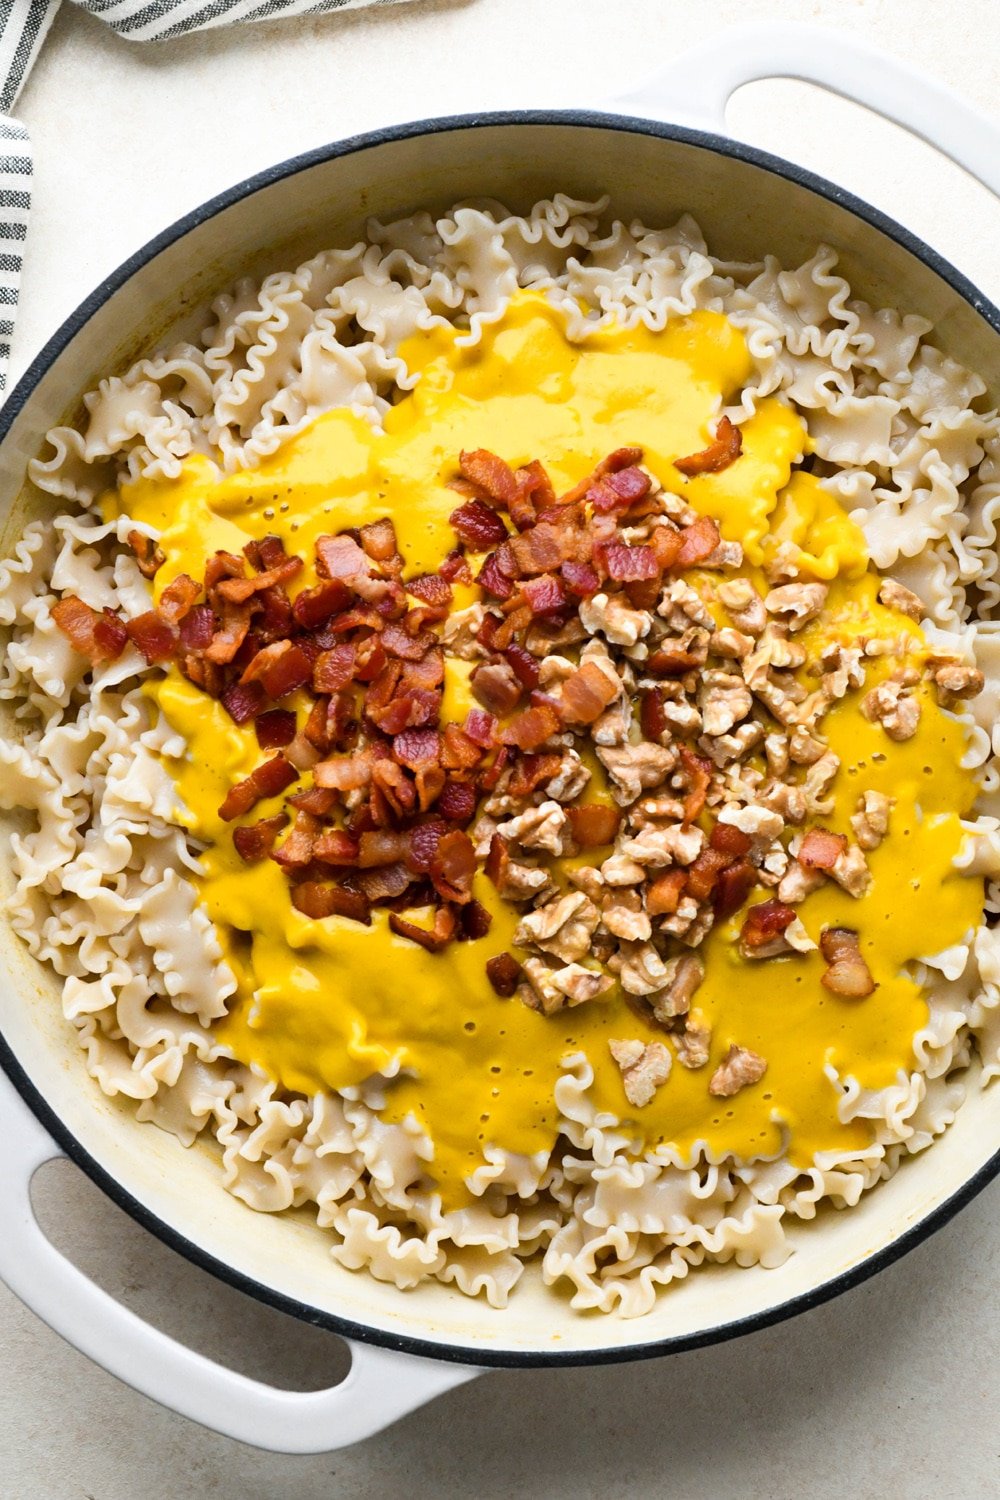 How to make Dairy Free Butternut Squash Pasta: Pasta, pasta sauce, bacon, and walnuts added back to the skillet, before stirring.